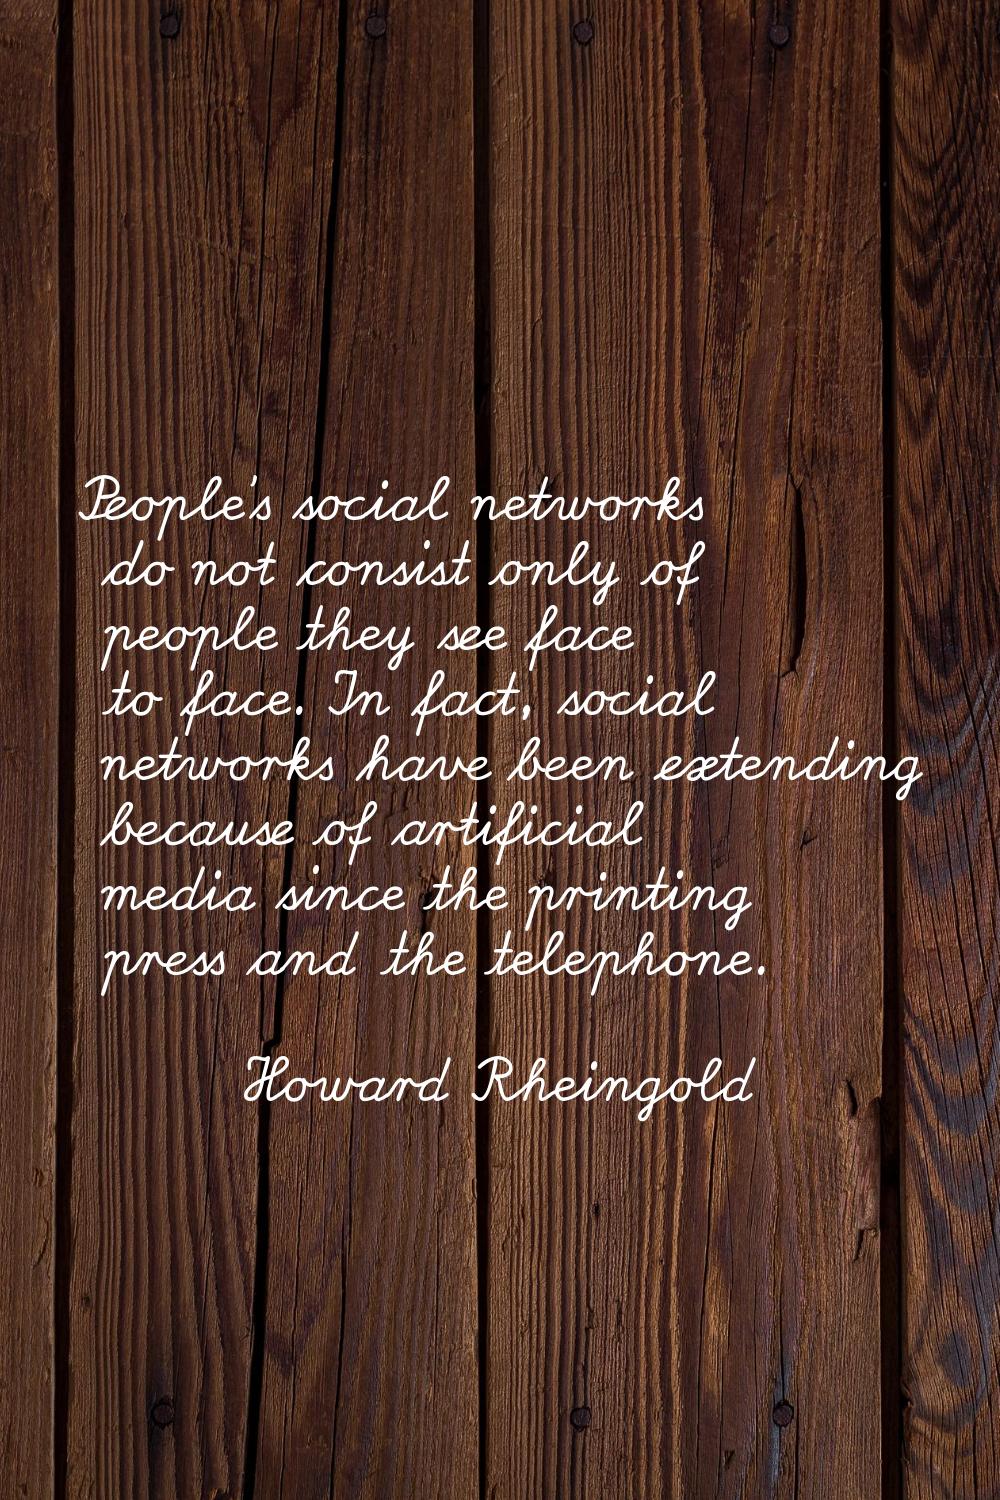 People's social networks do not consist only of people they see face to face. In fact, social netwo